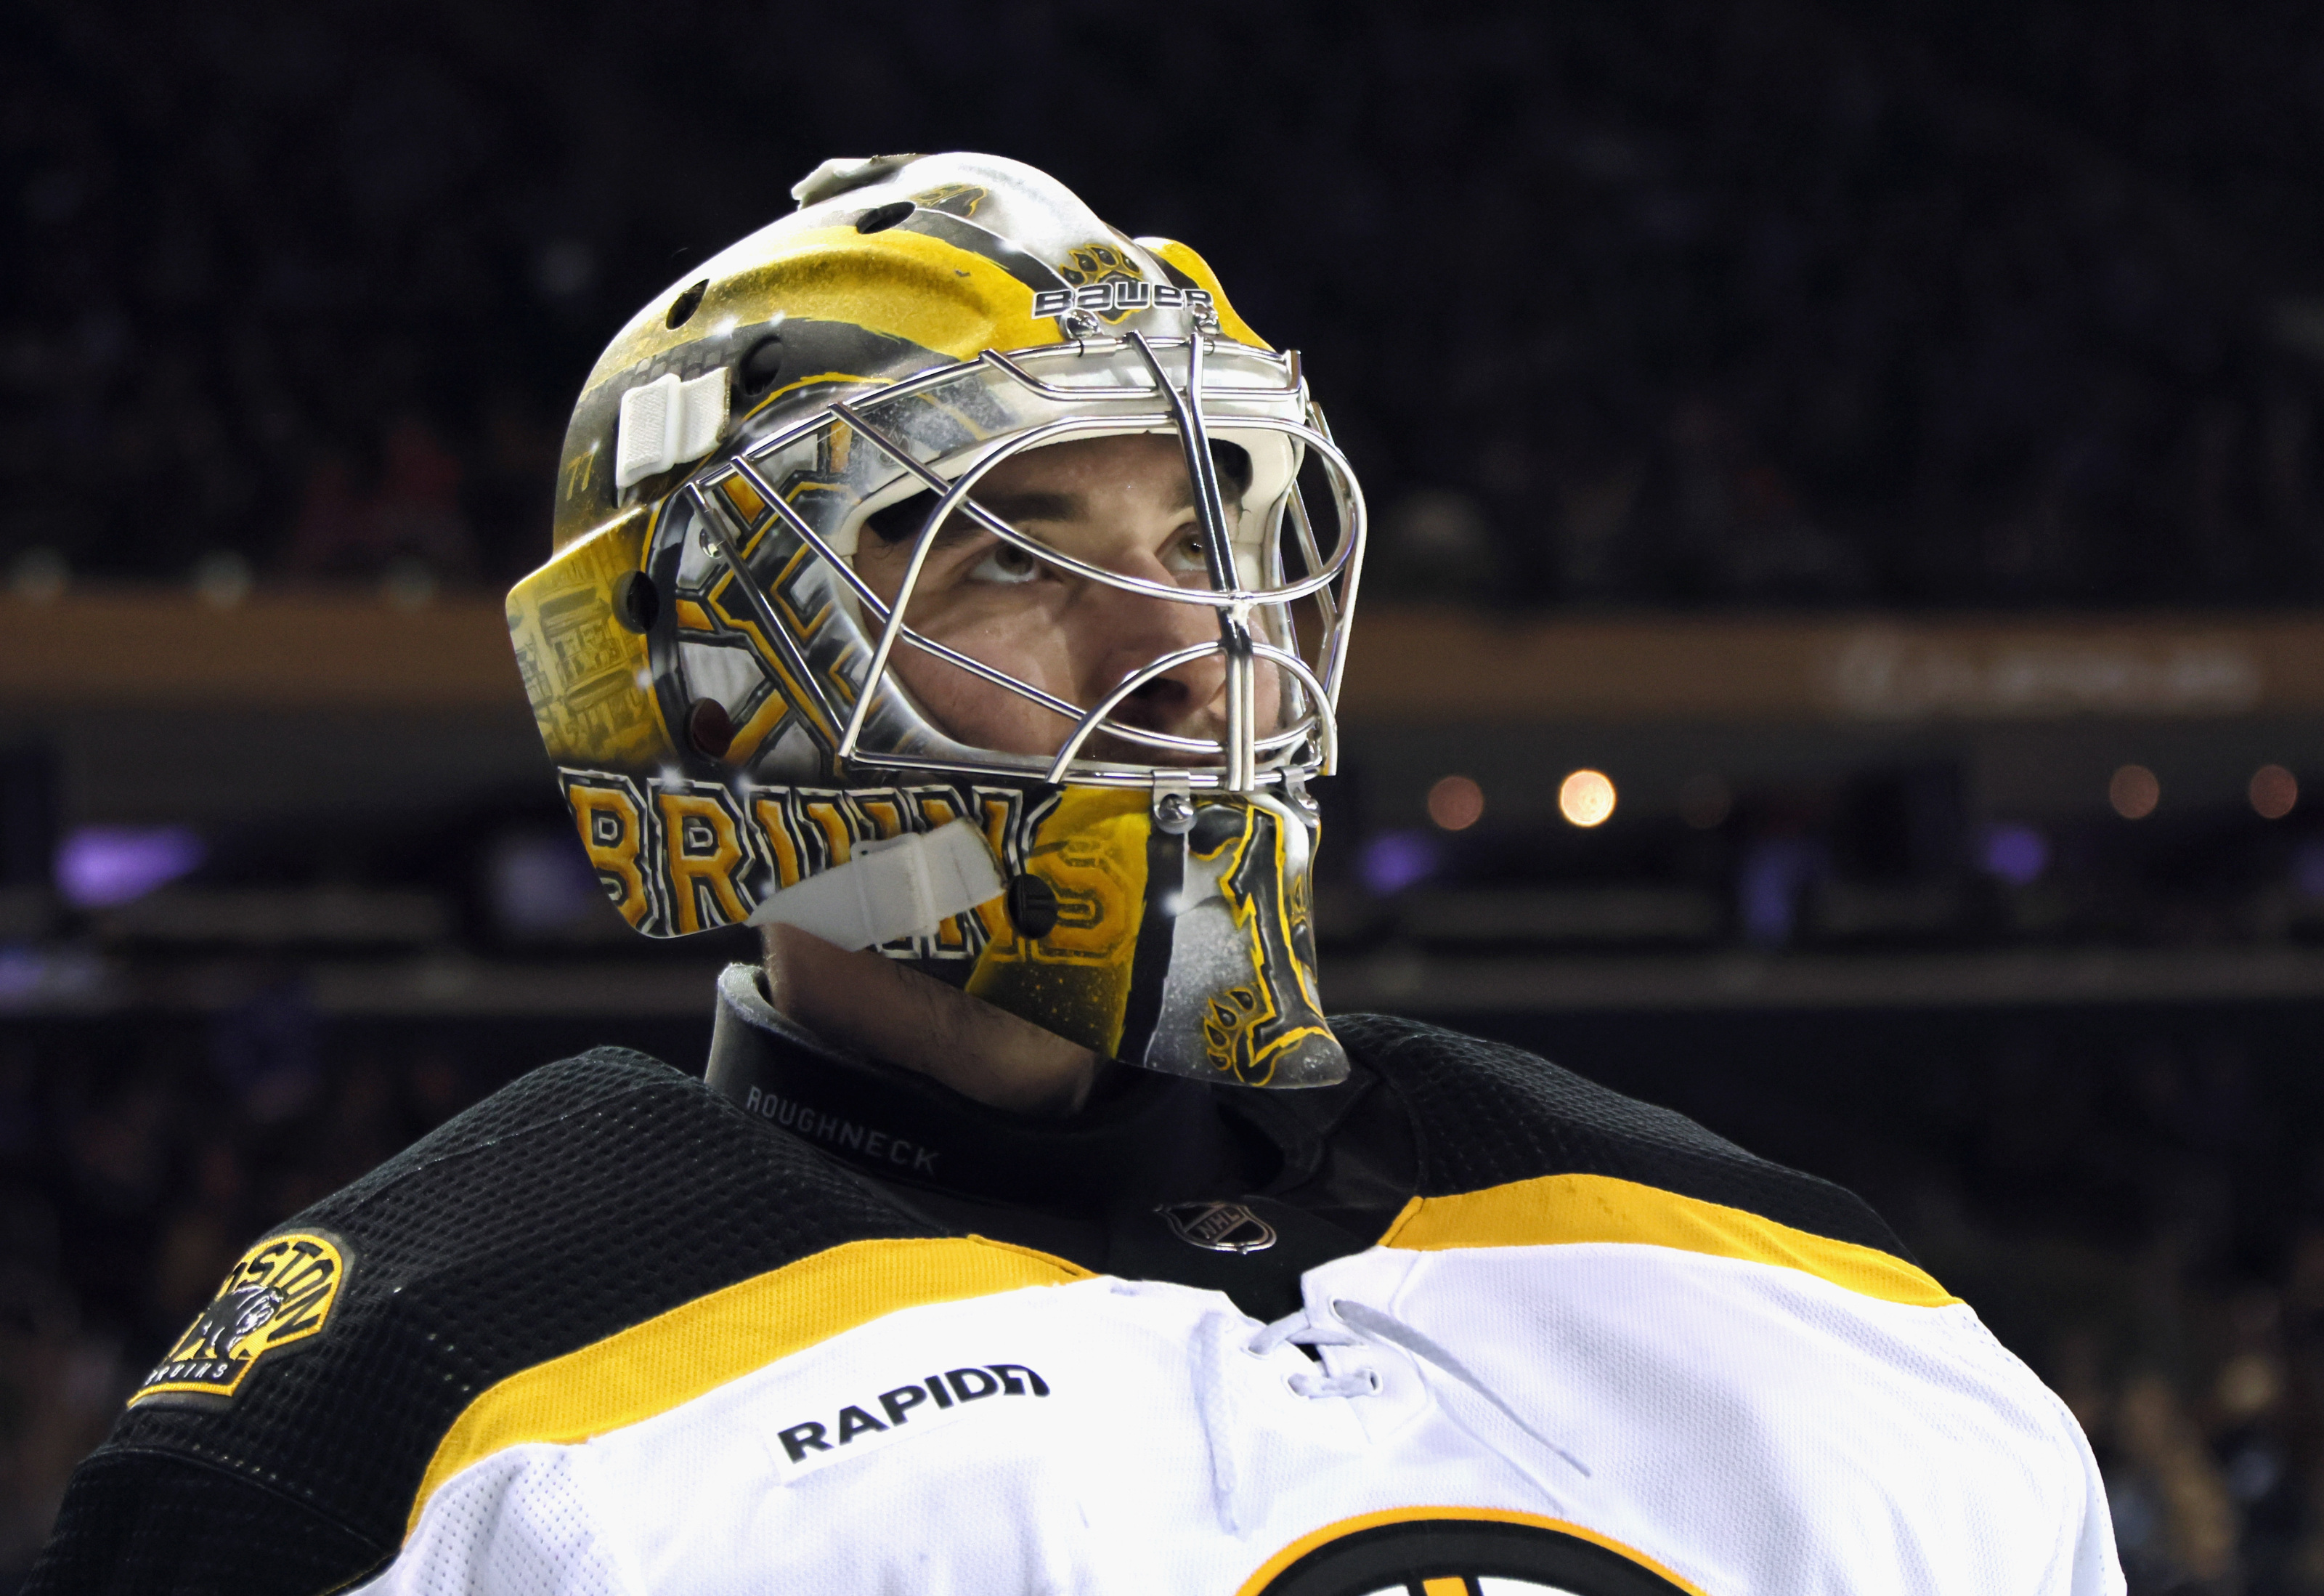 Boston Bruins: Jeremy Swayman is off to a solid start